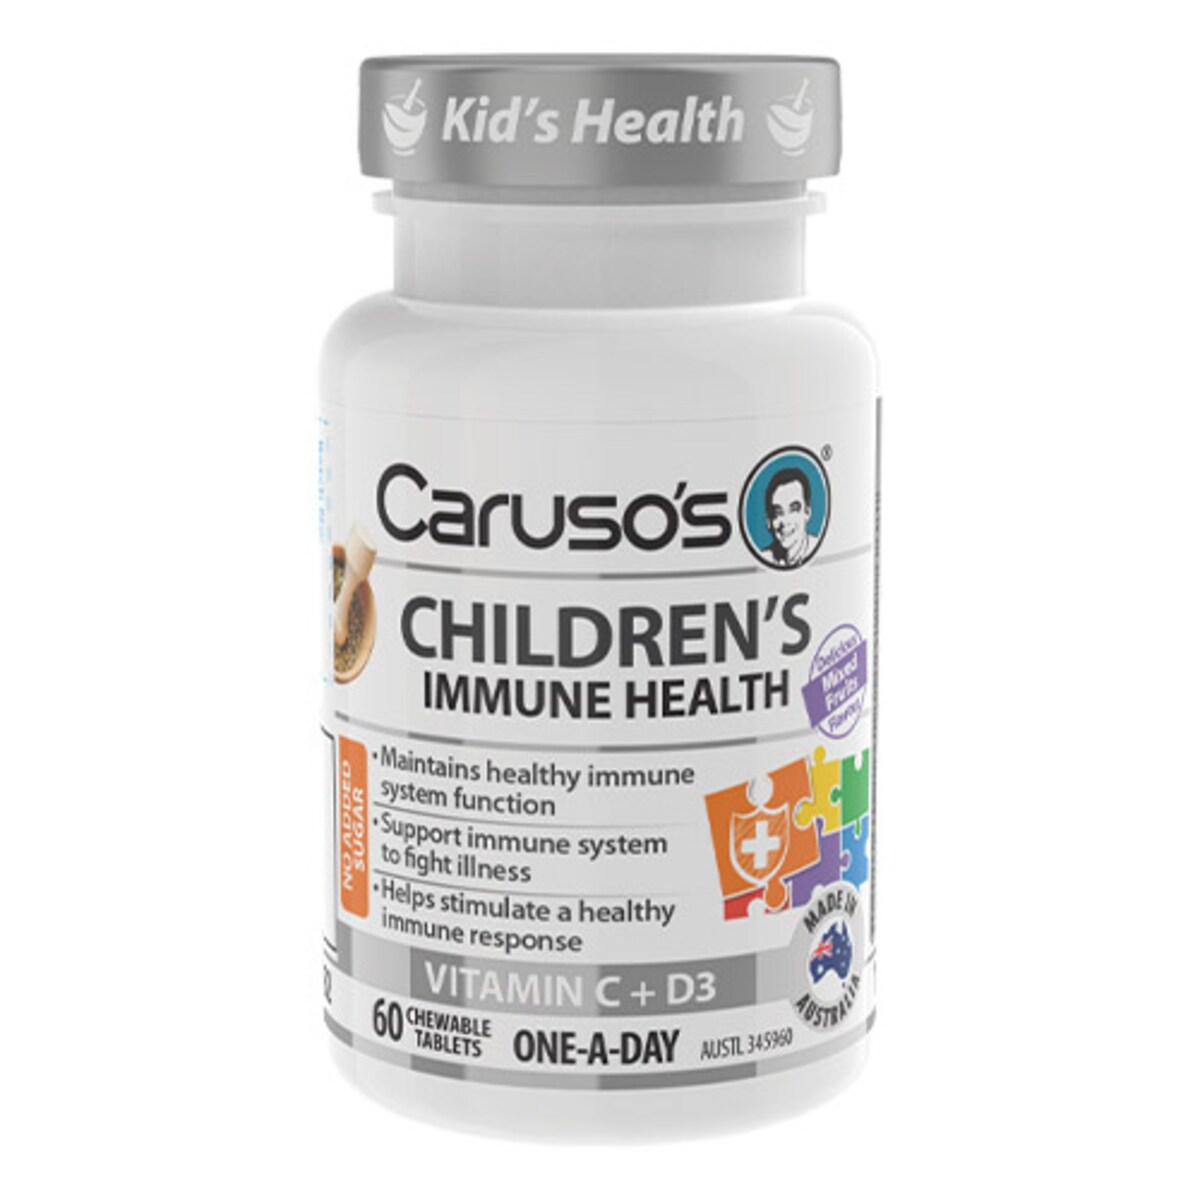 Carusos Childrens Immune Health 60 Chewable Tablets